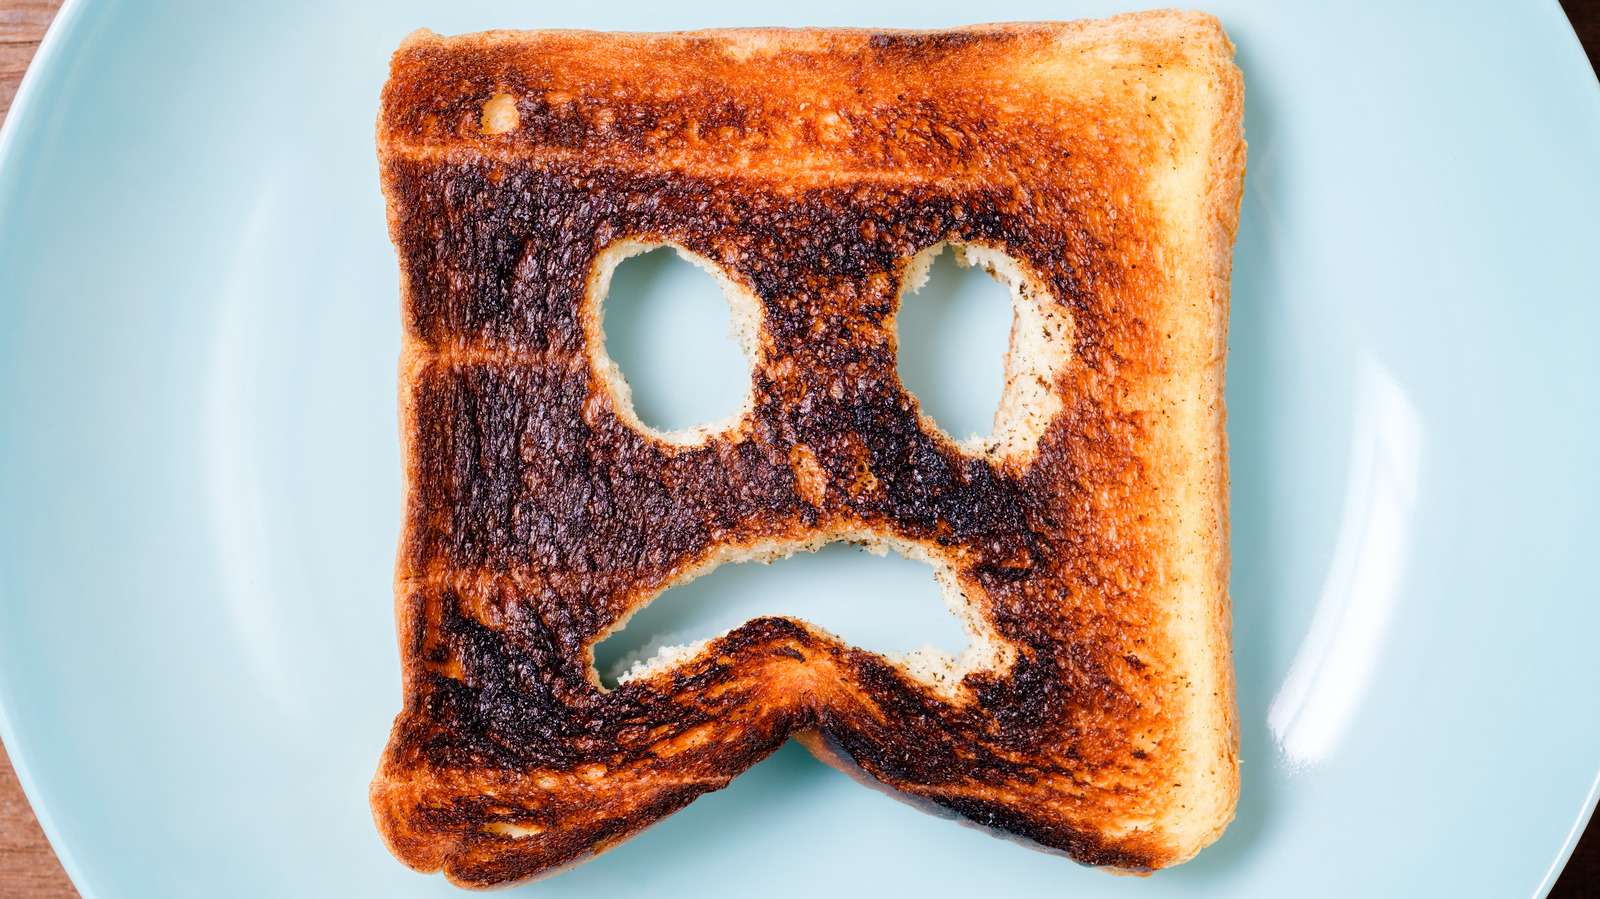 Should You Actually Be Concerned About Eating Burnt Toast